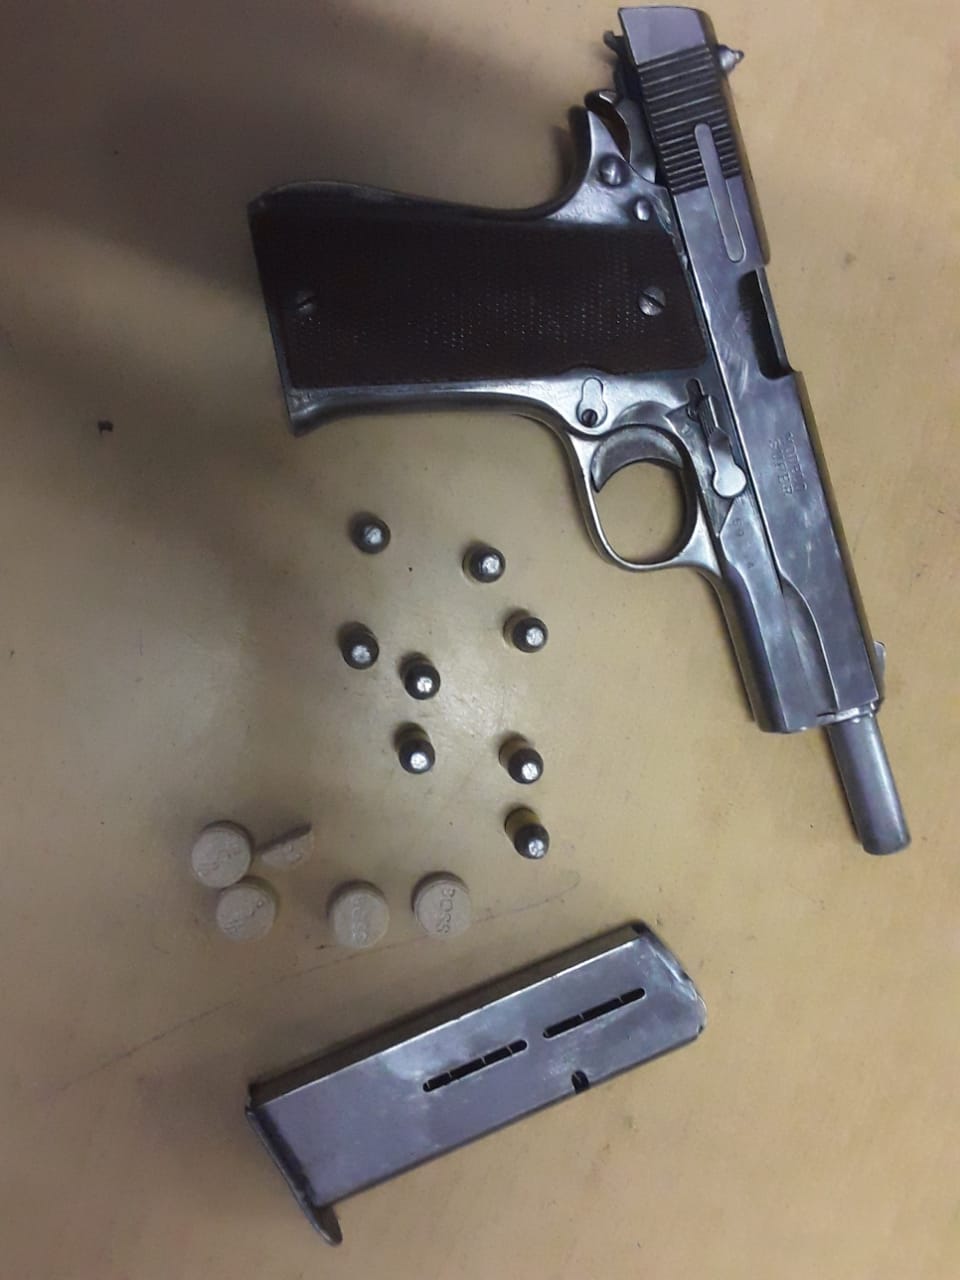 Suspect arrested with an unlicensed firearm and ammunition in Lavender Hill